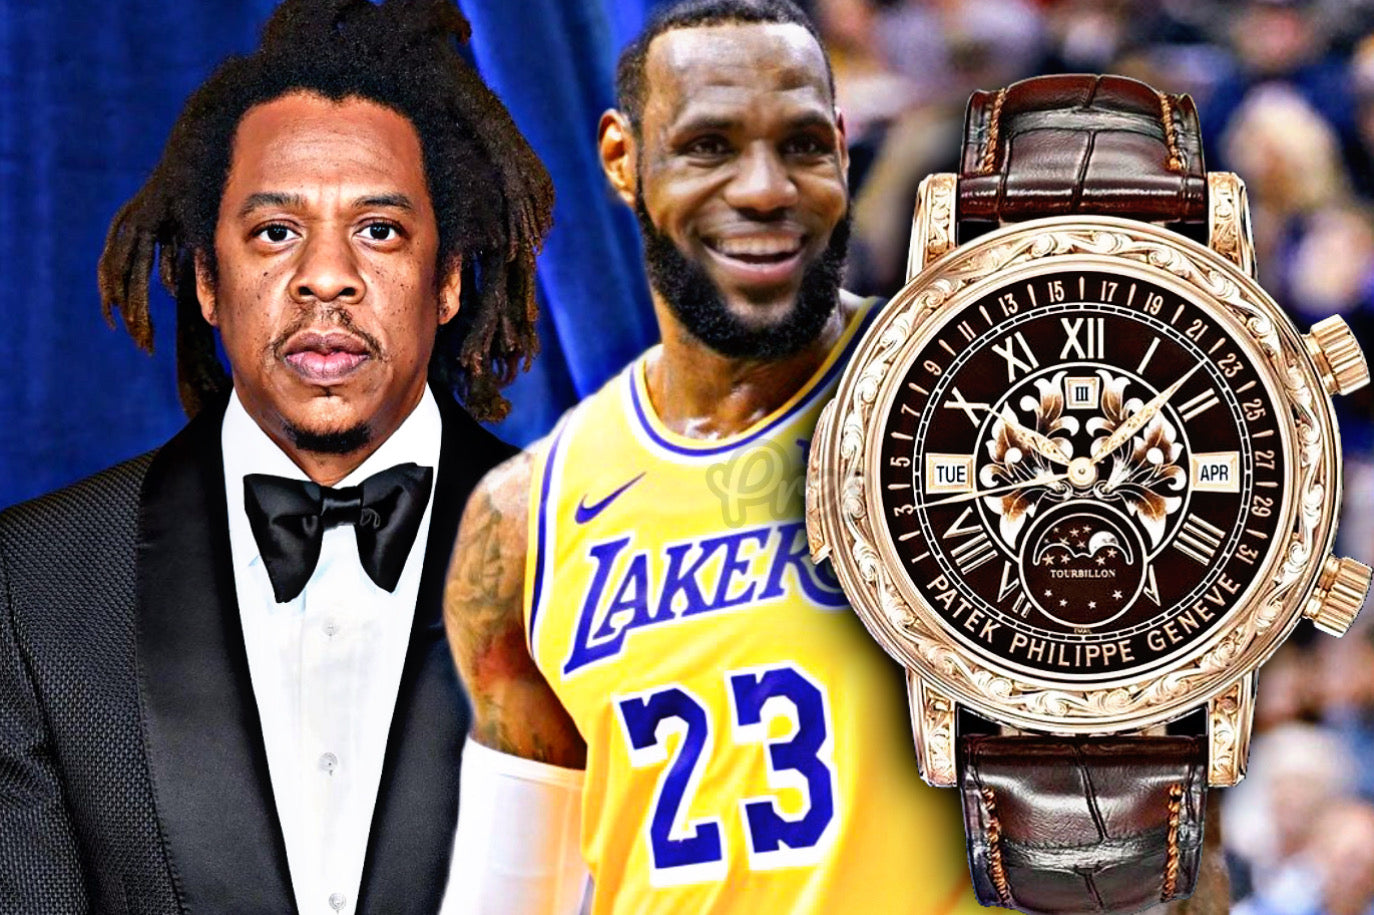 Jay-Z Brought an Important Piece of Watch History to the Super Bowl | GQ